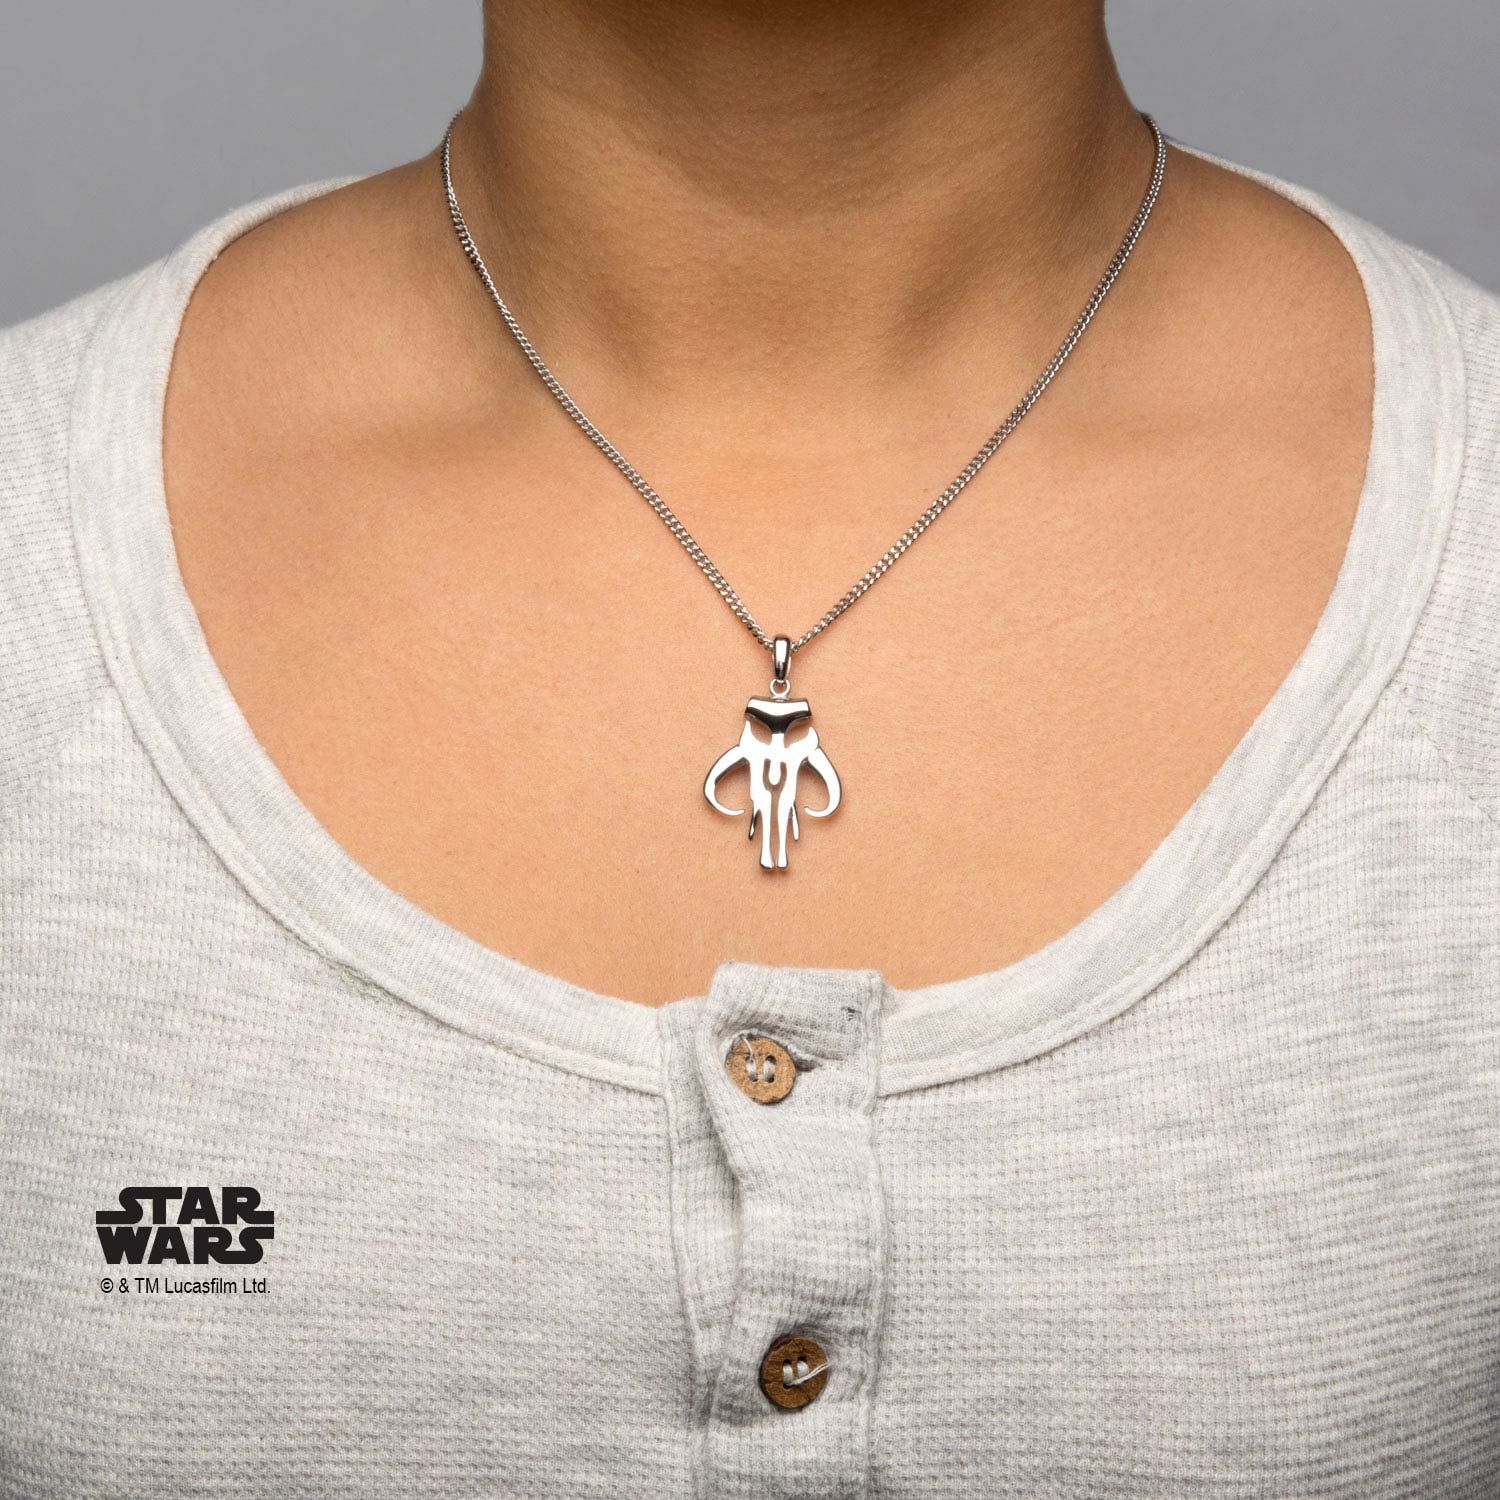 Star Wars Mandalorian Cut Out Symbol Small Pendant with Chain